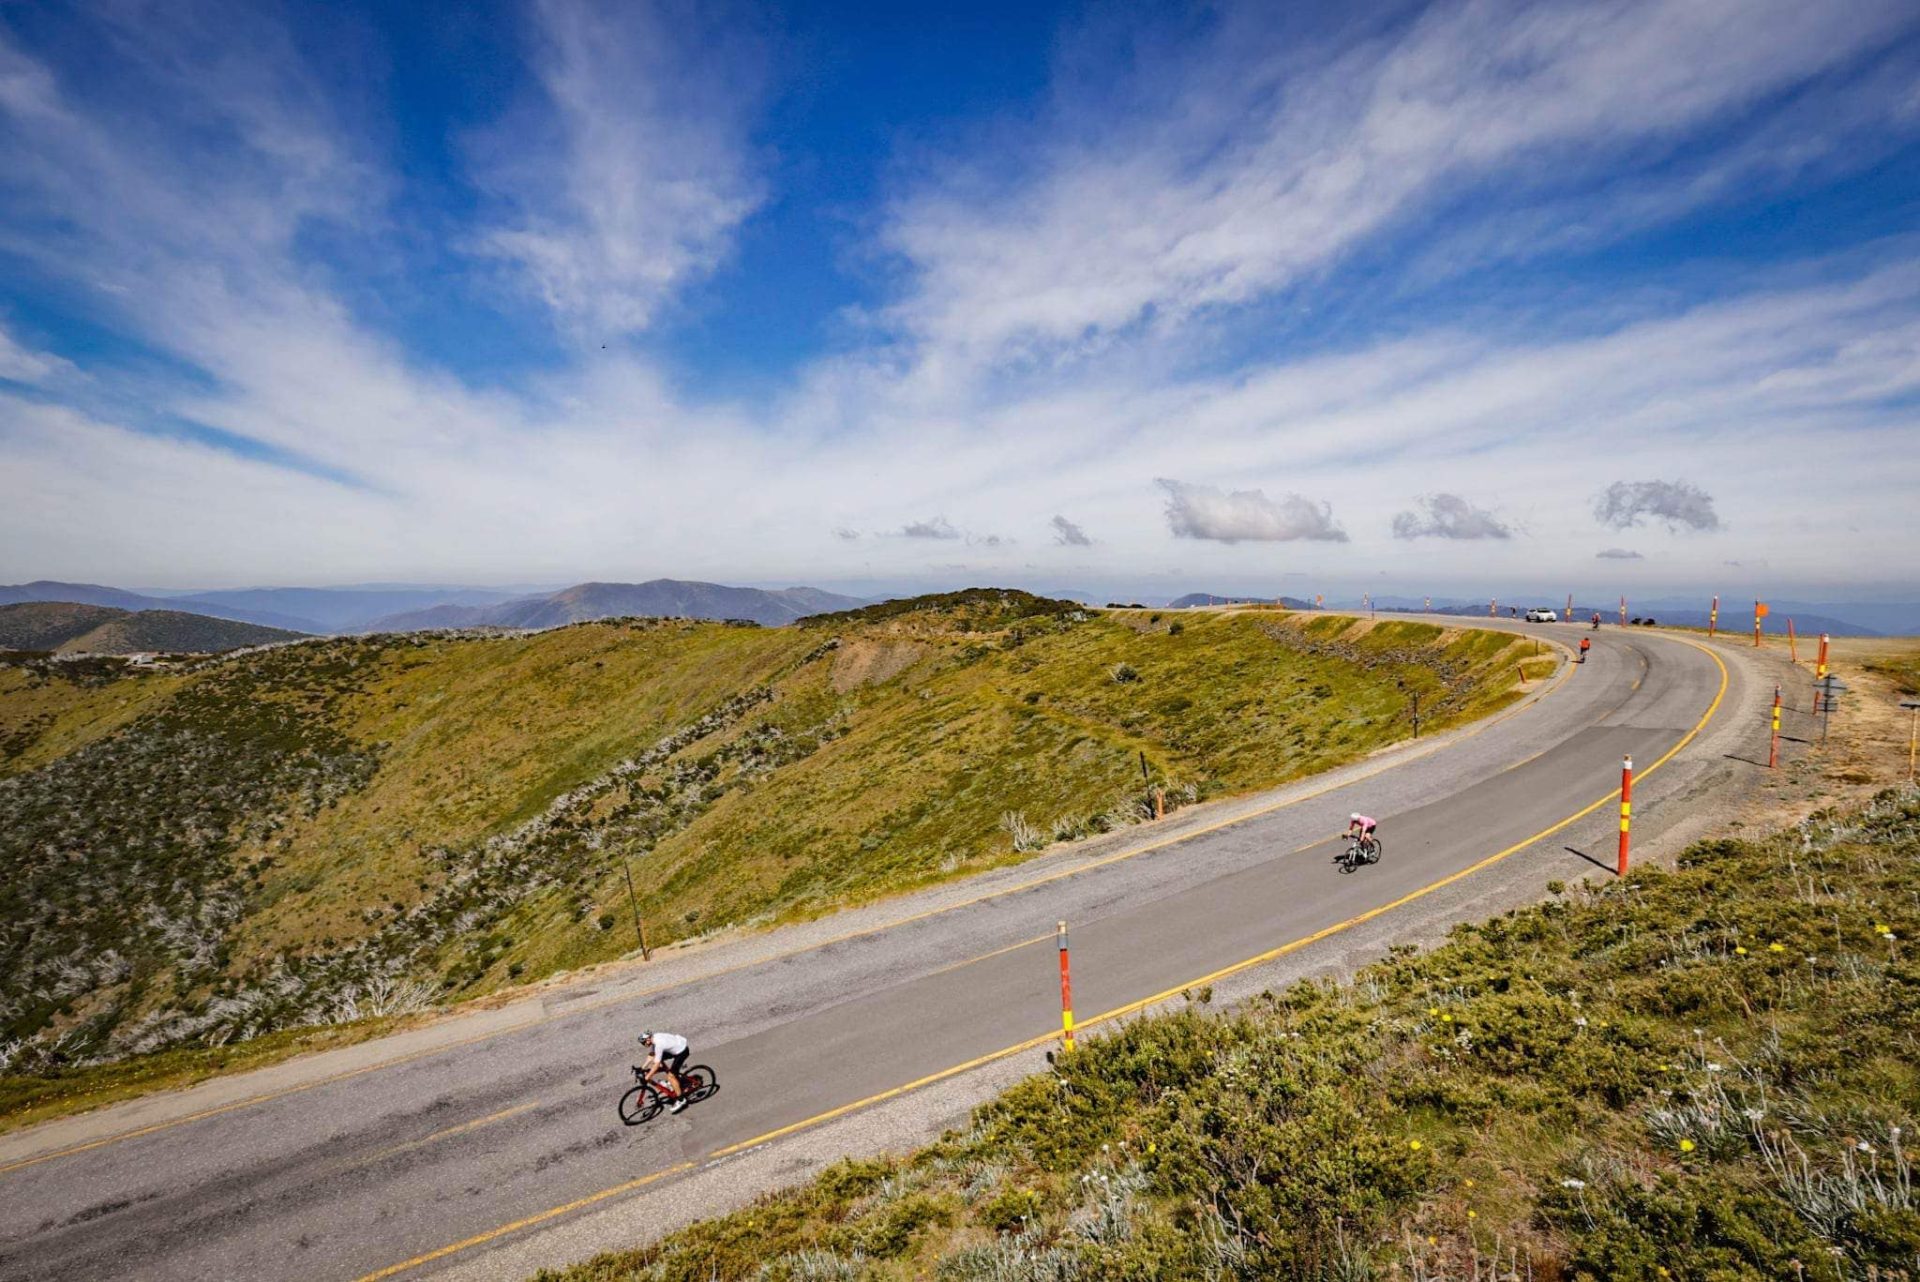 A pair of cyclists, separated by around 30 metres, descend off the summit of Mt. Hotham in the Victorian Alps under blue, cloudy skies.